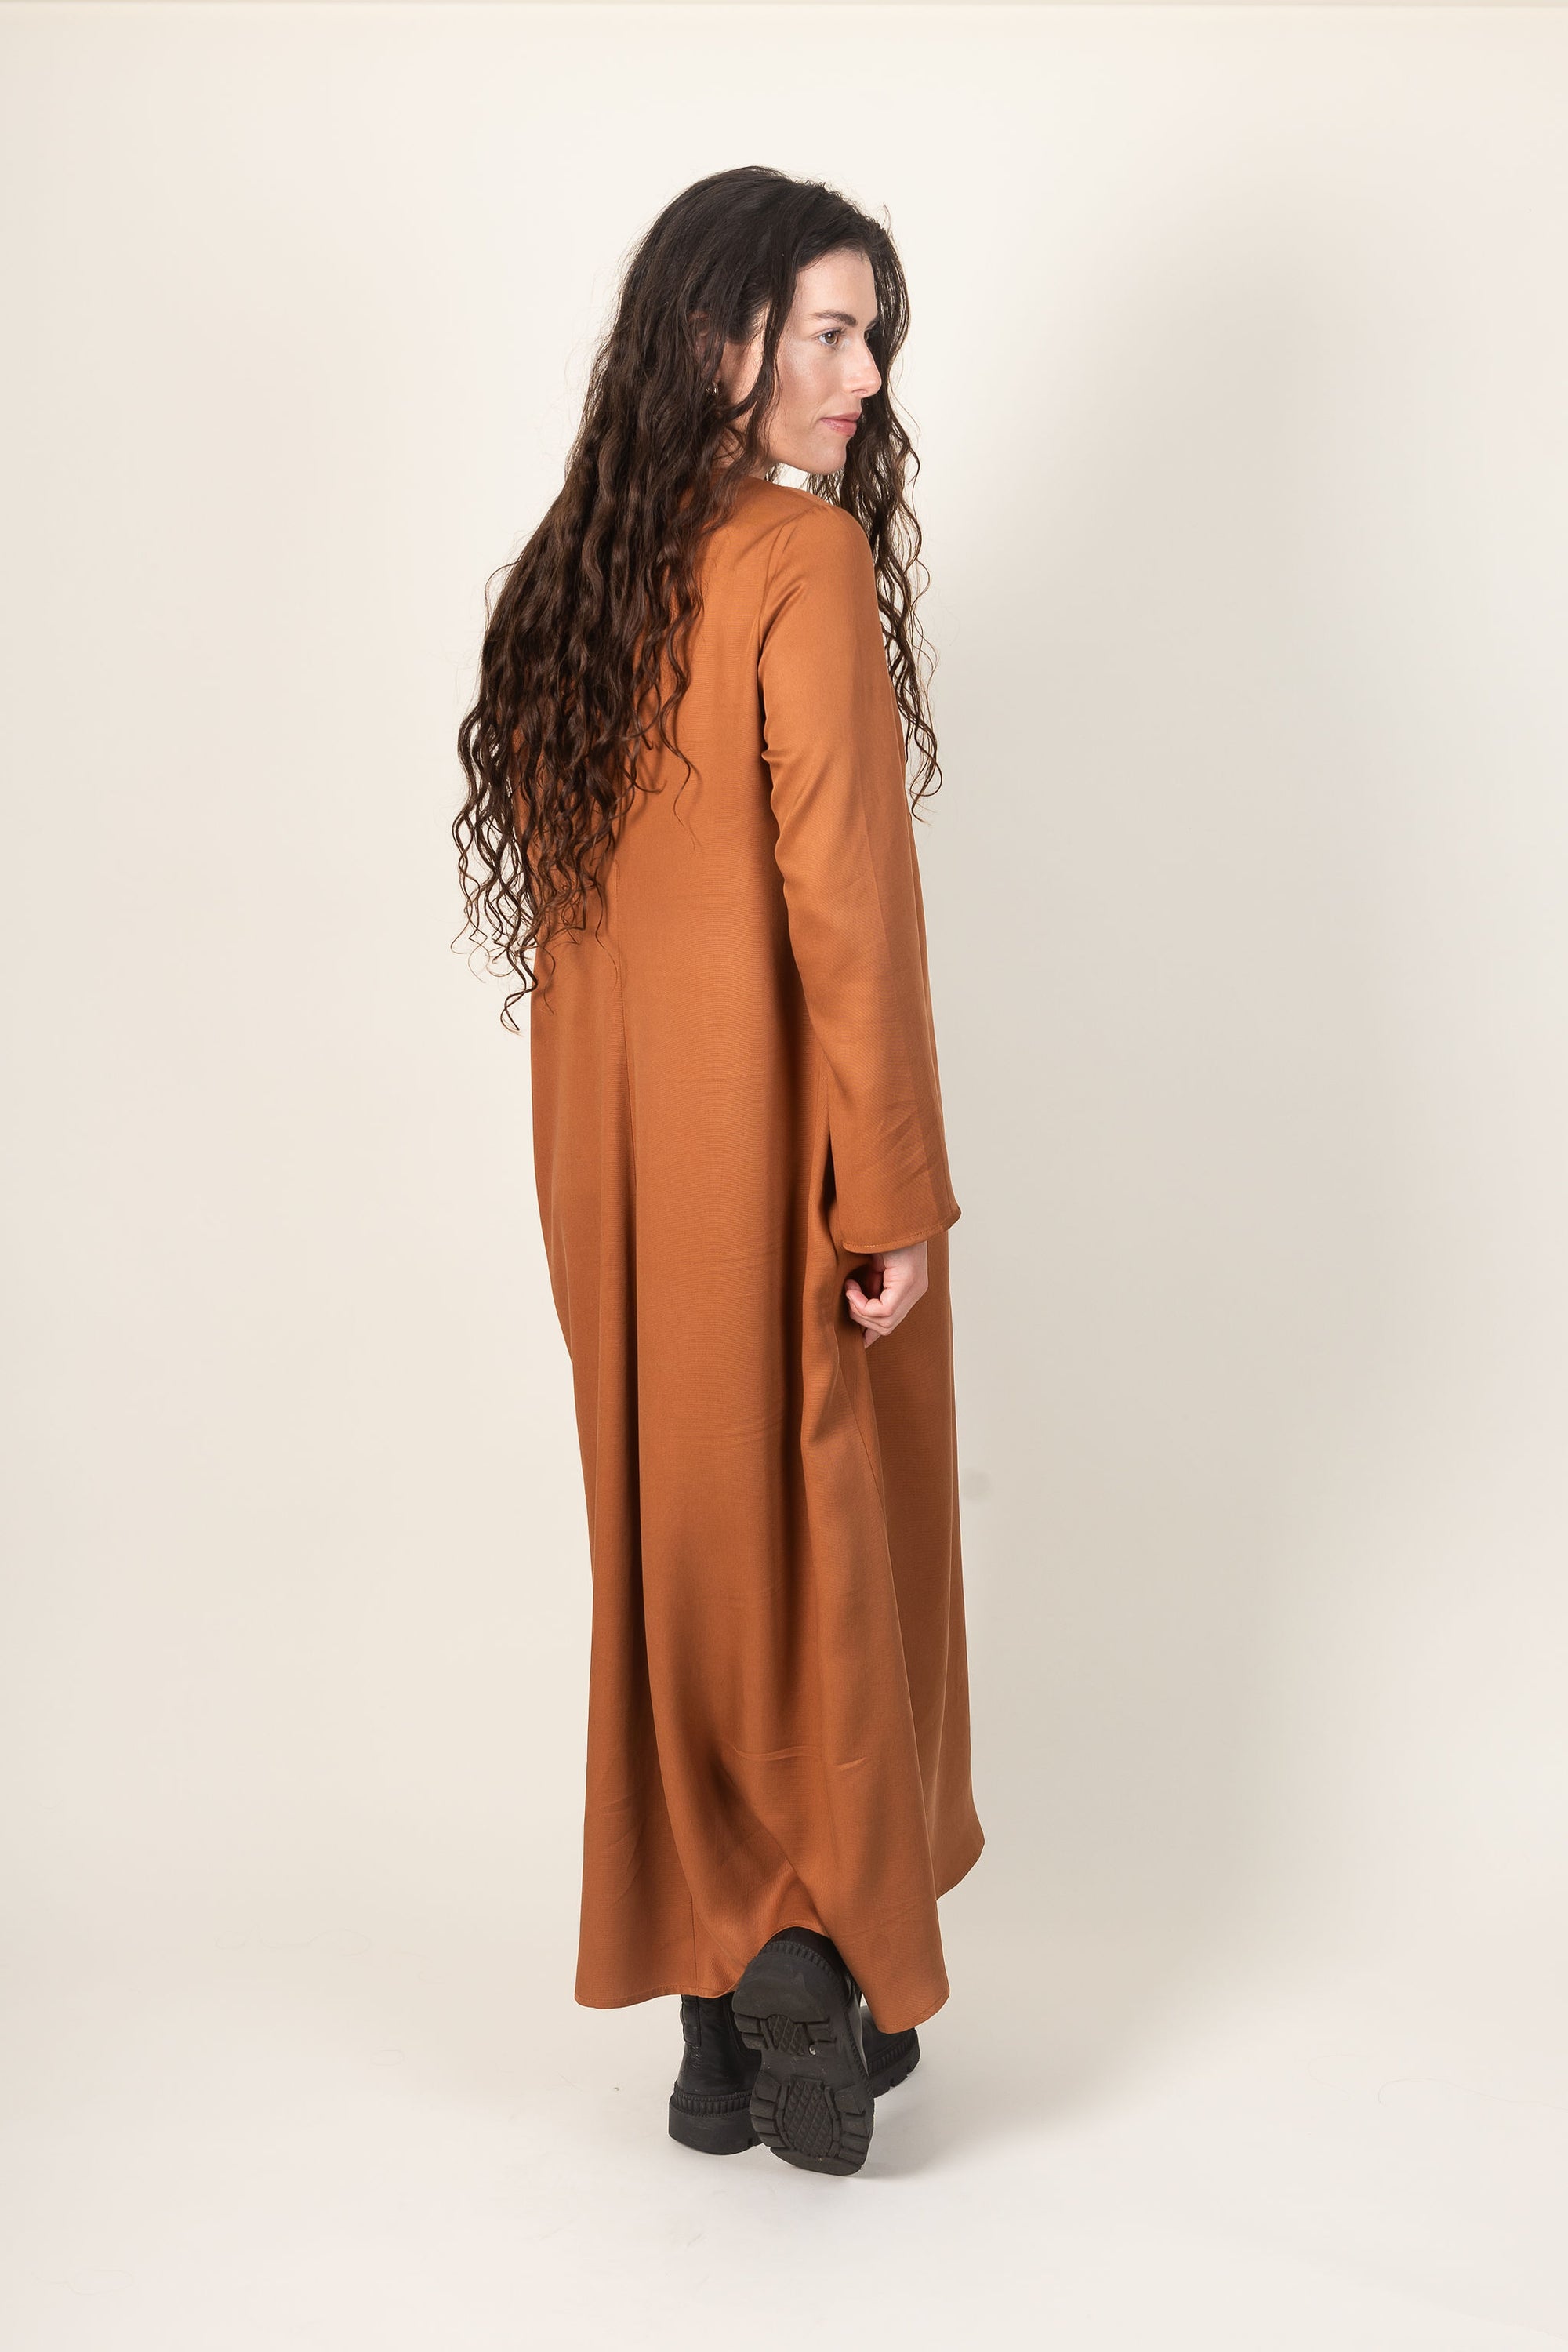 Ames Store Staple Dress in Bronze Winter dress back with black boots